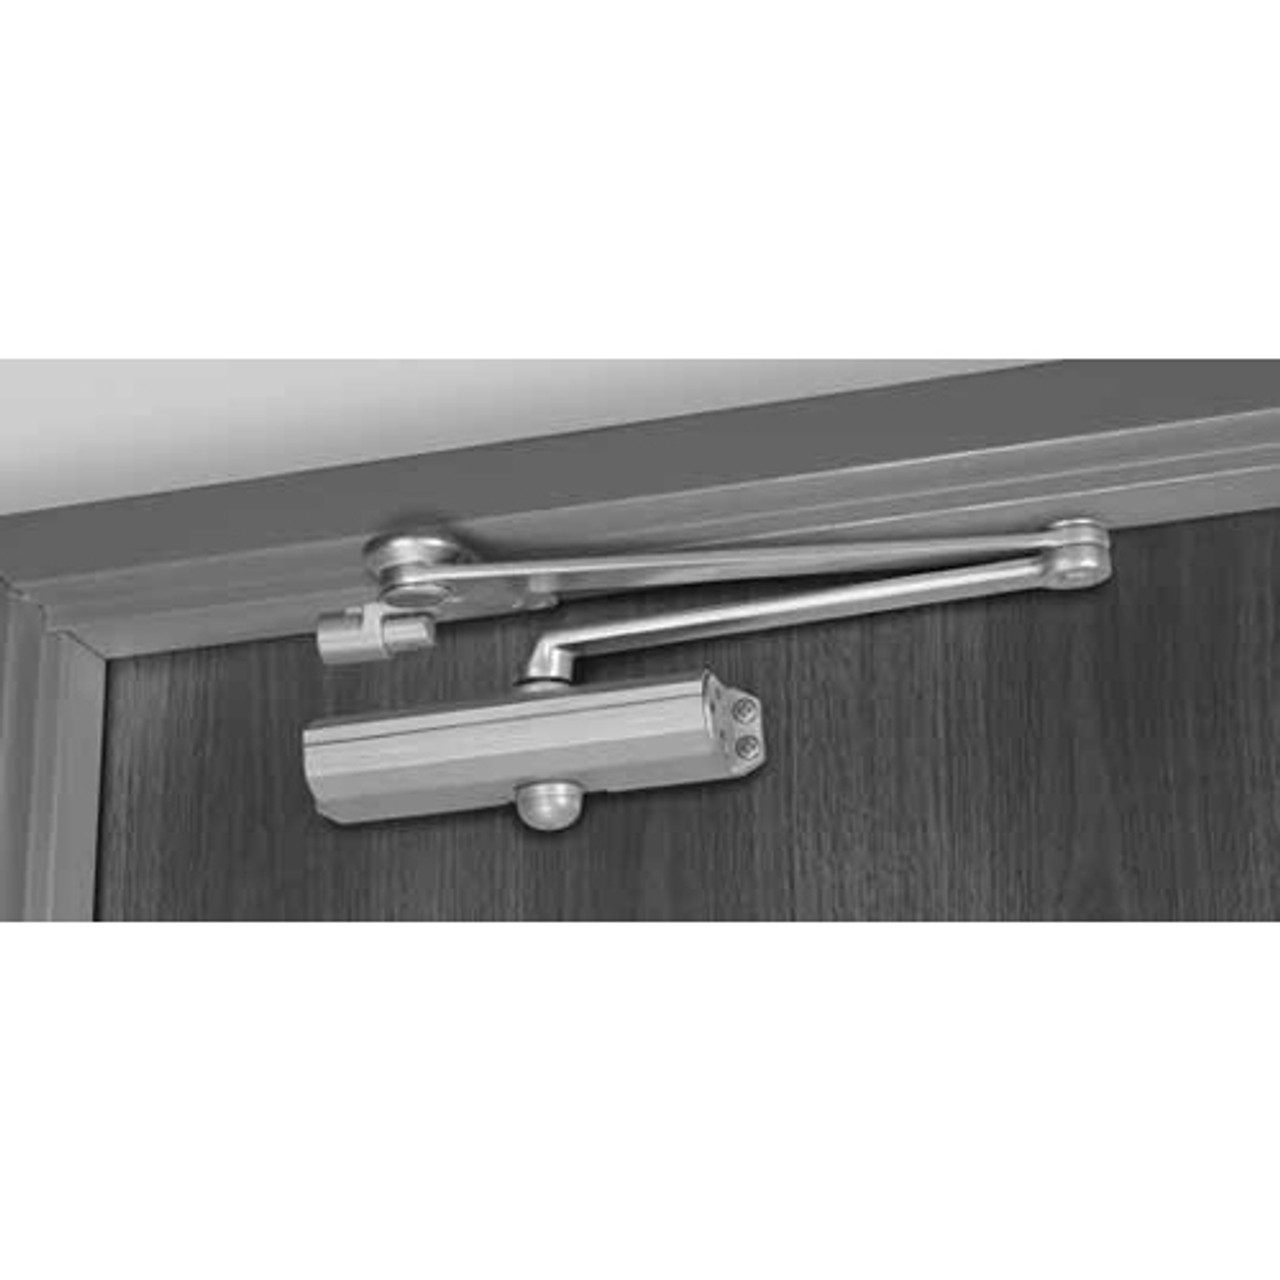 CPS1601T-690 Norton 1600 Series Hold Open Adjustable Door Closer with CloserPlus Spring Arm in Statuary Bronze